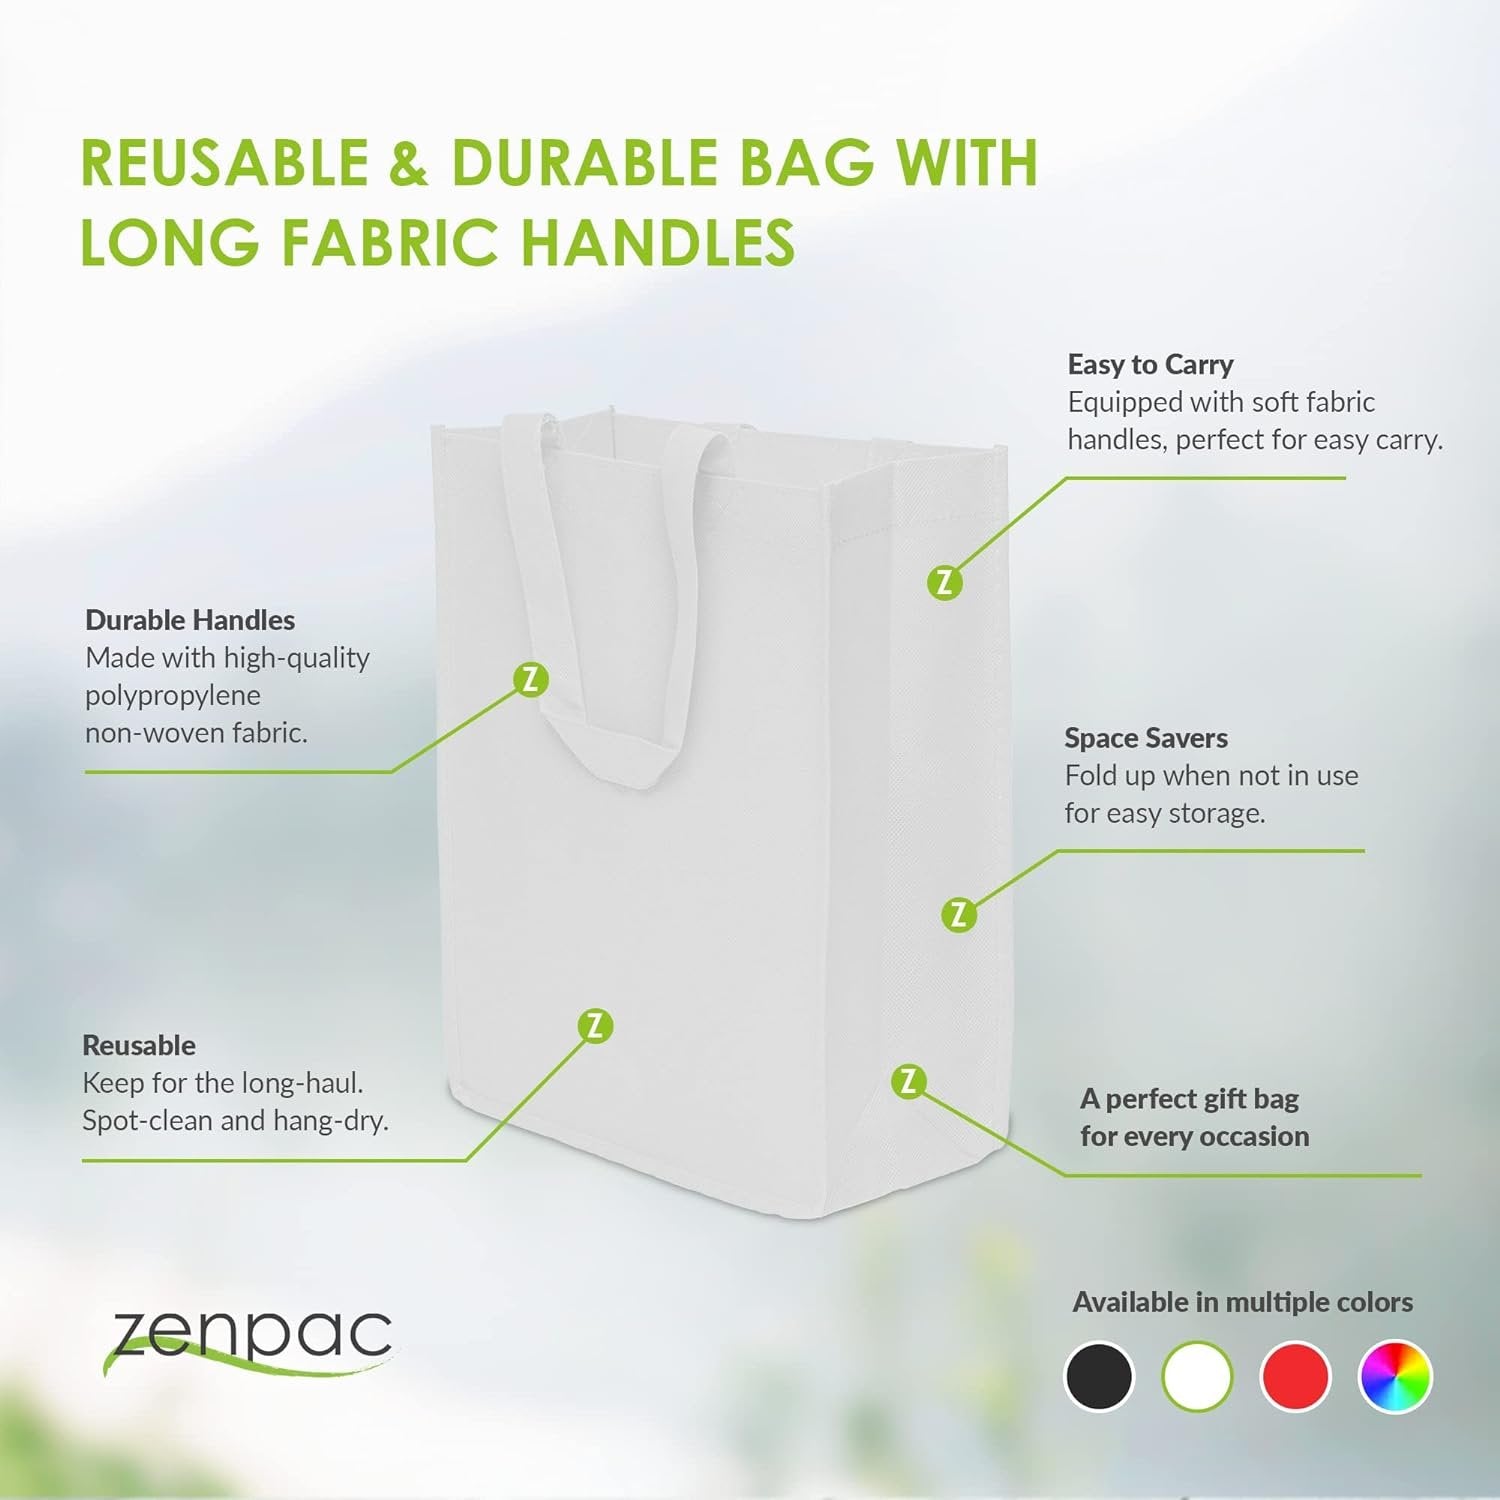 Reusable Bags - 12 Pack Medium White Heavy Duty Tote Bag with Handles, Blank Totes with Durable Stitched Handles for Grocery Shopping, Gifts, Retail, Small Businesses, Boutiques, Bulk - 10x5x13